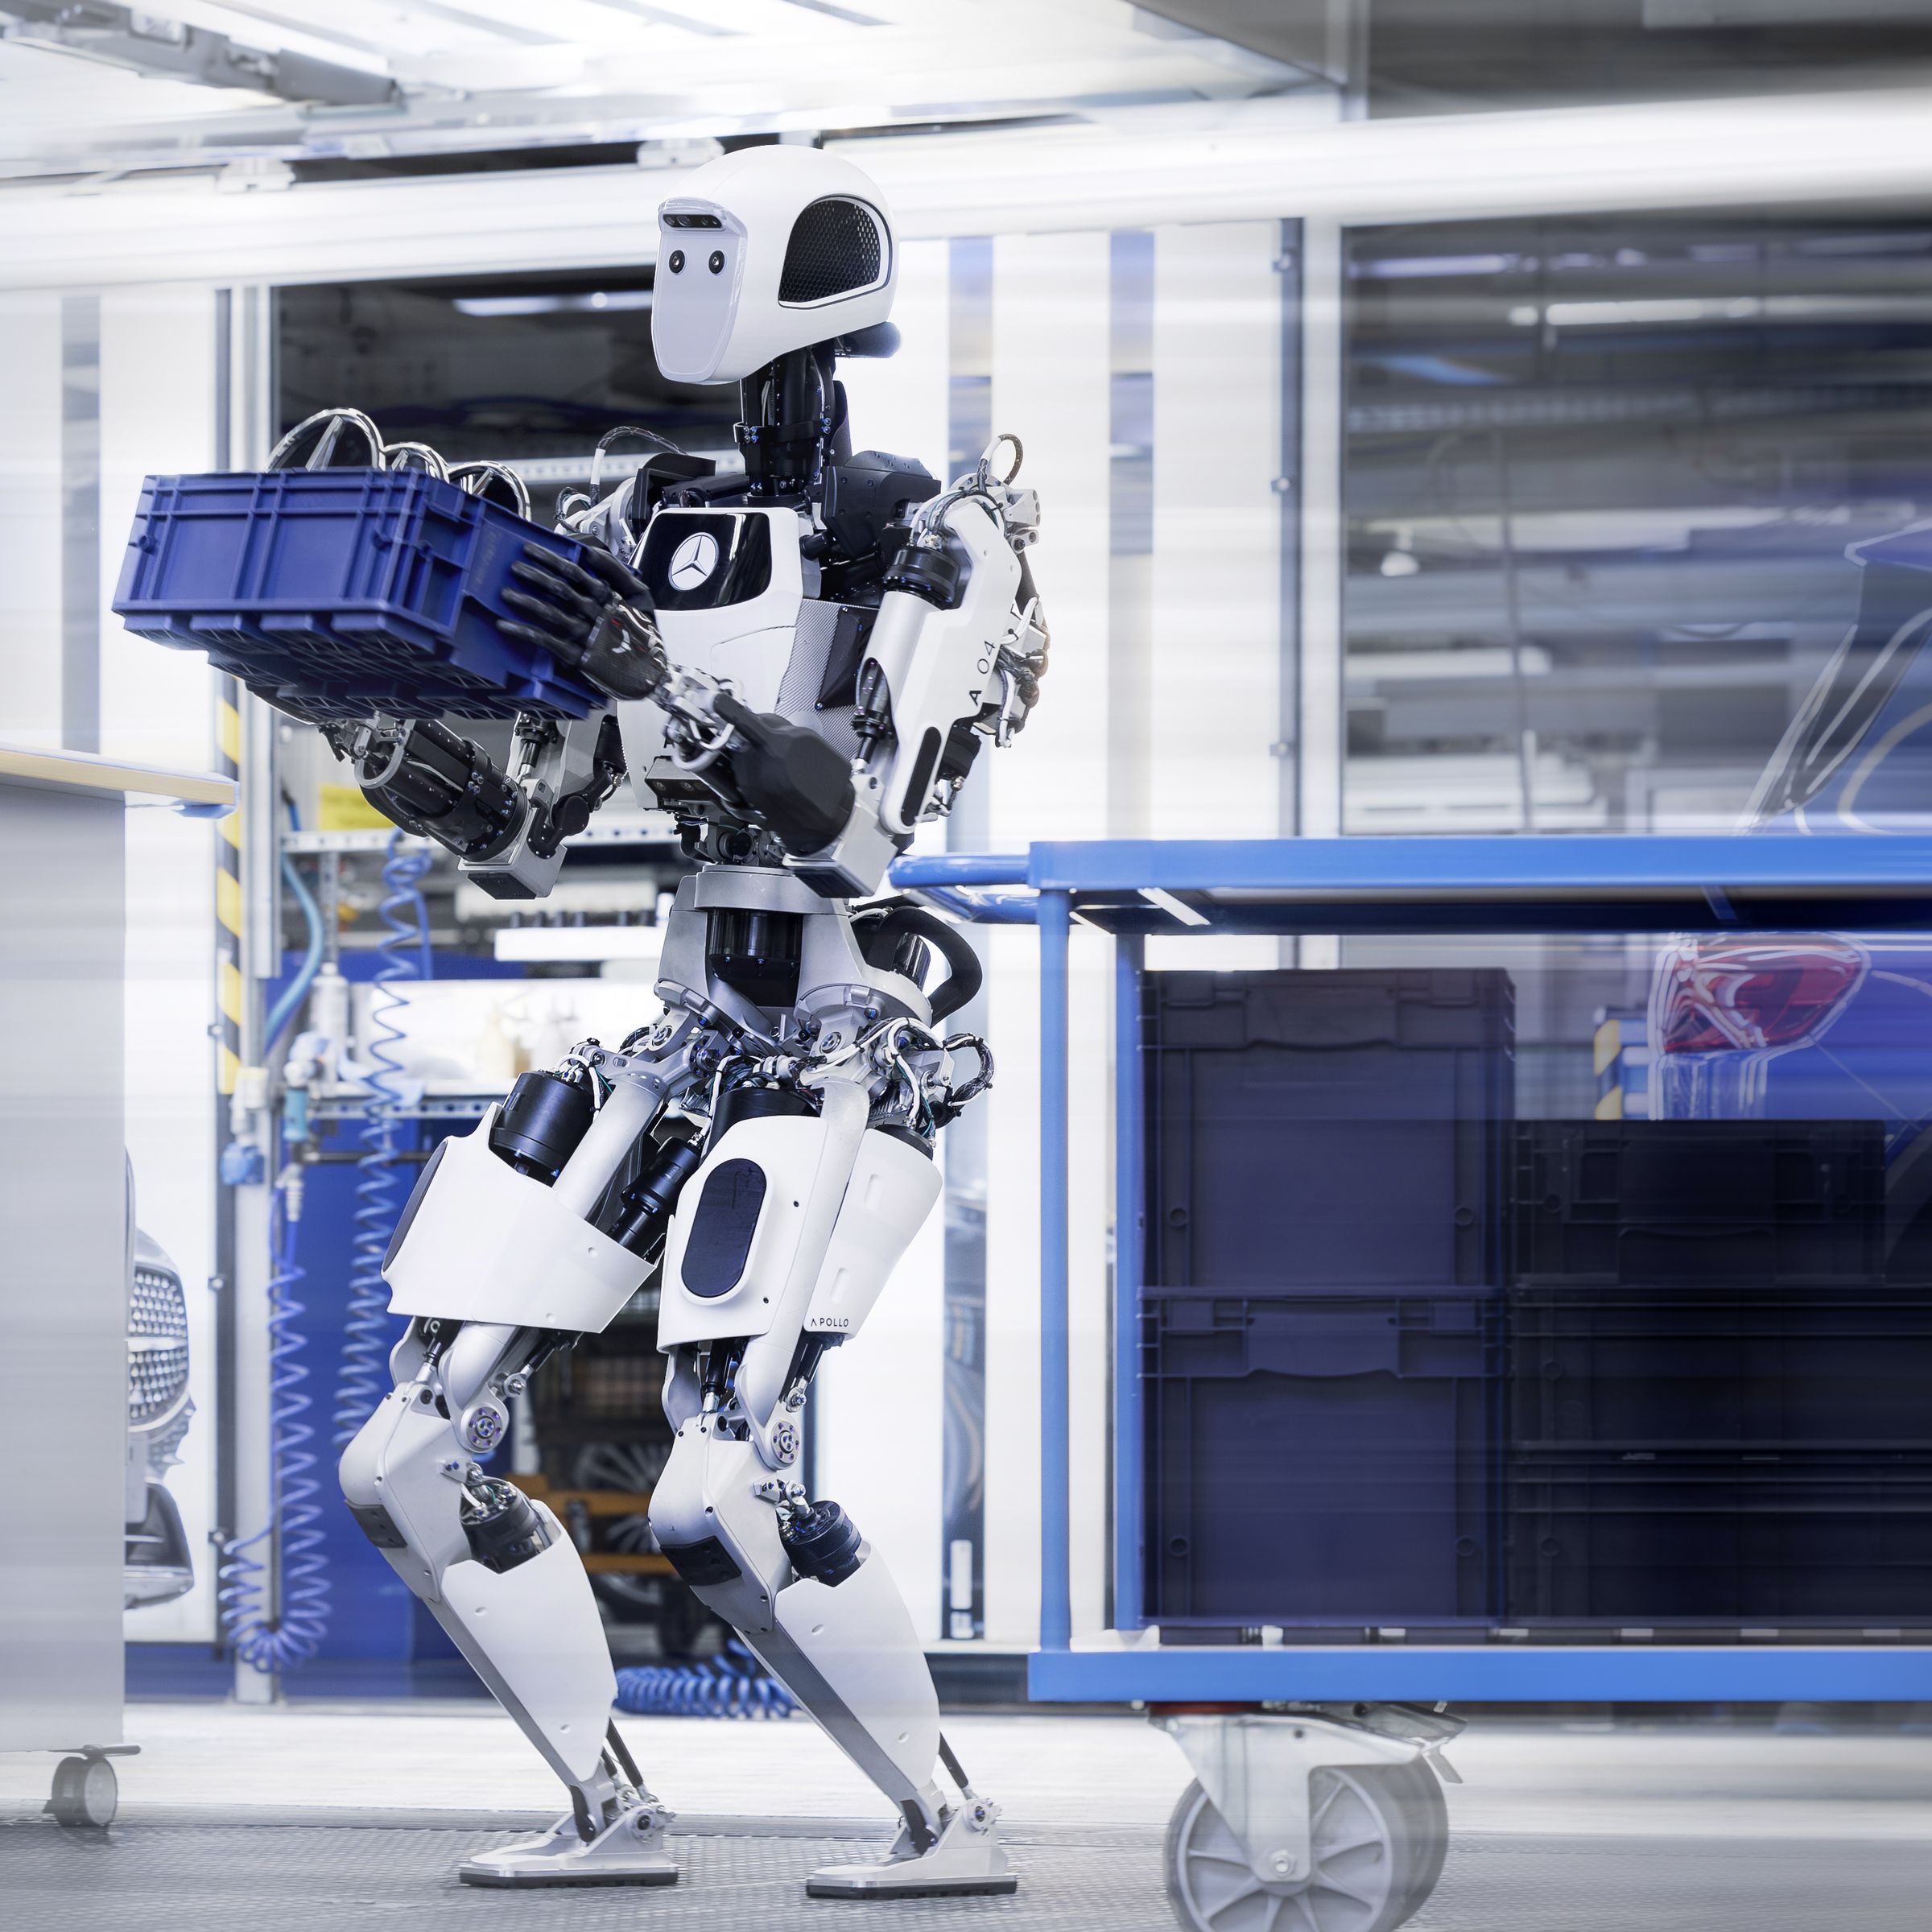 Apptronik’s Apollo robot carrying a blue crate in a Mercedes factory.